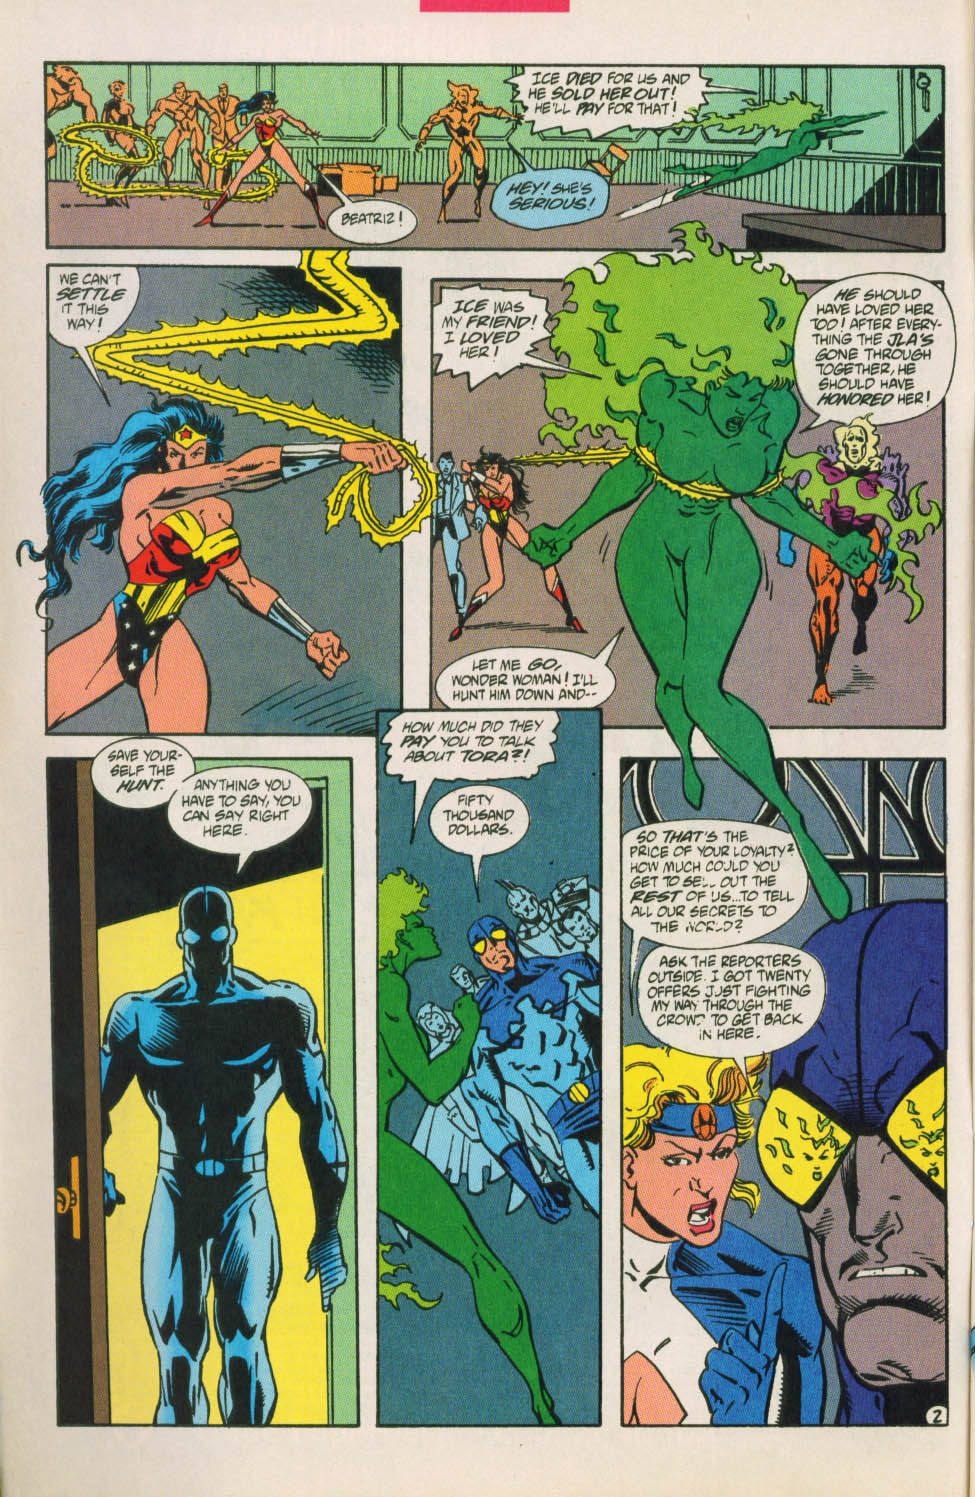 Justice League International (1993) 67 Page 2